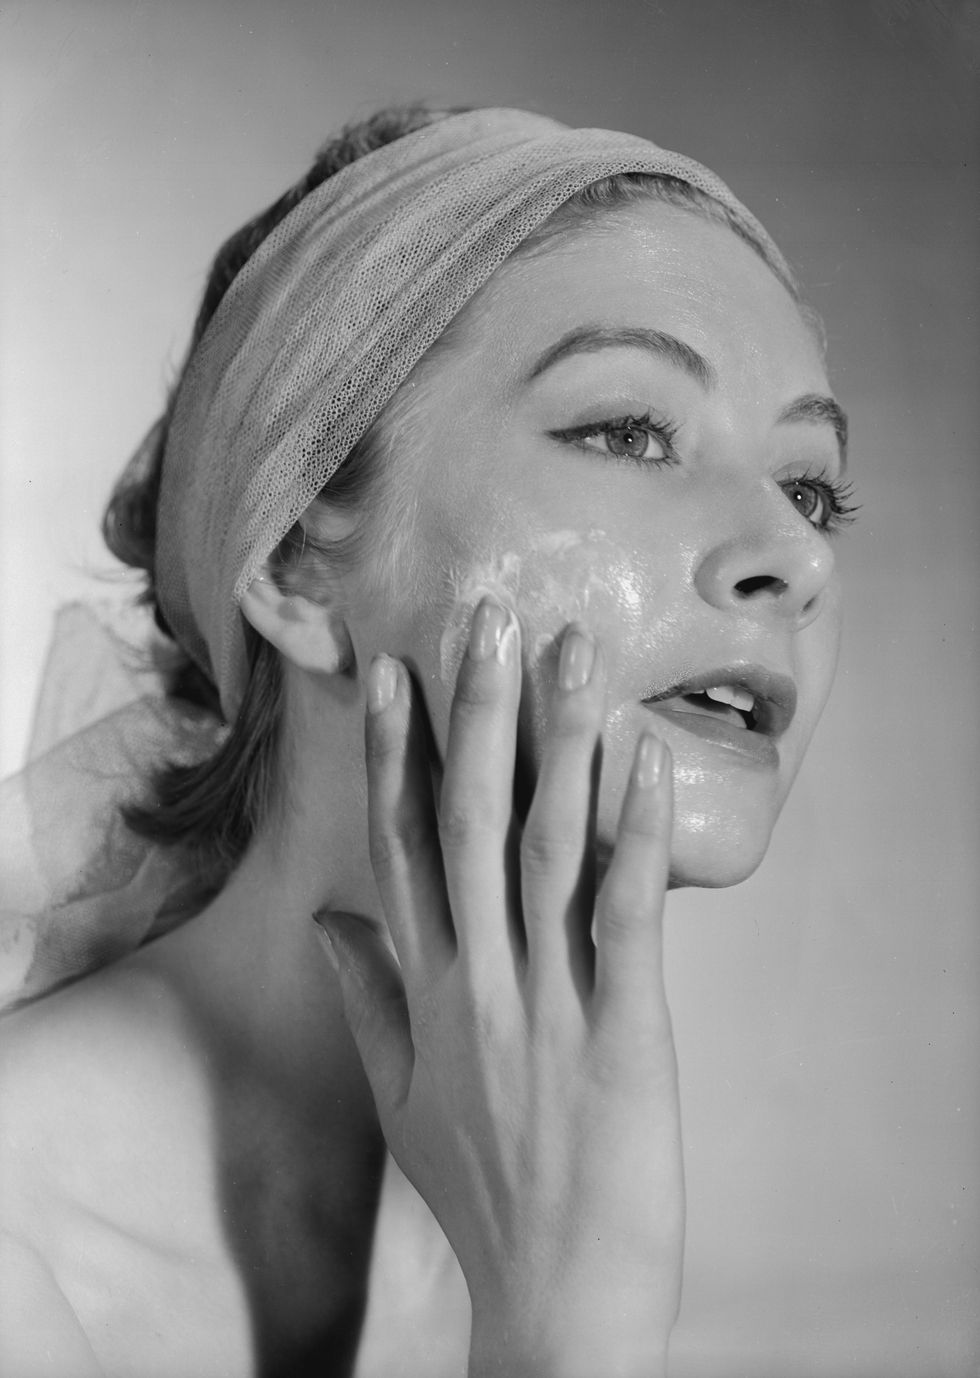 17th december 1952 a woman, her hair tied back with a bandeau, applies cream to her face photo by chaloner woodsgetty images